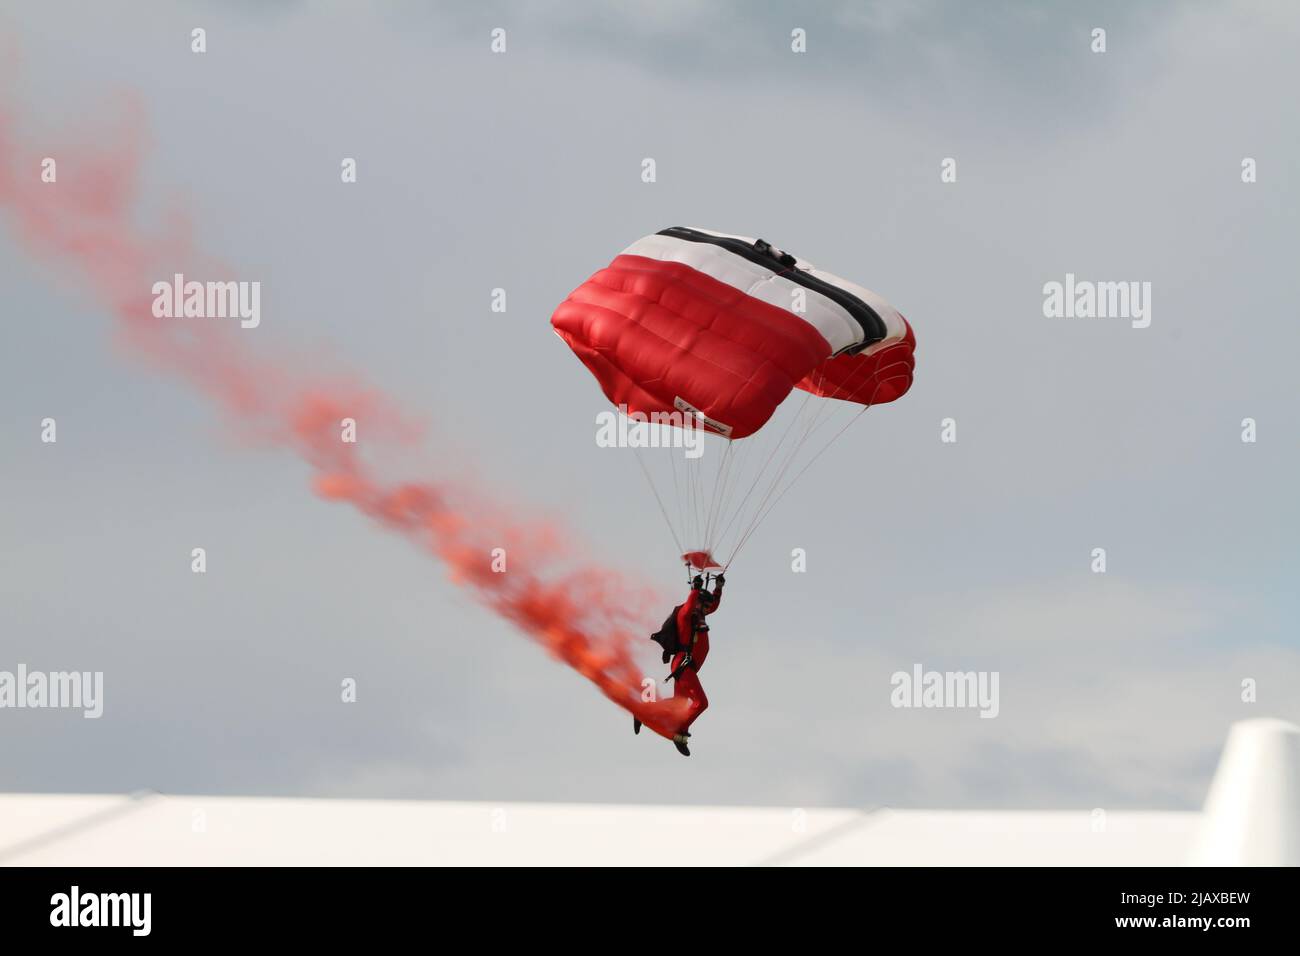 Ipswich, UK. 01st Jun 2022. After being cancelled in 2020 and 2021 due to Covid restrictions the Suffolk Show returns to Ipswich. The Red Devils parachute display team drop into the show. Credit: Eastern Views/Alamy Live News Stock Photo